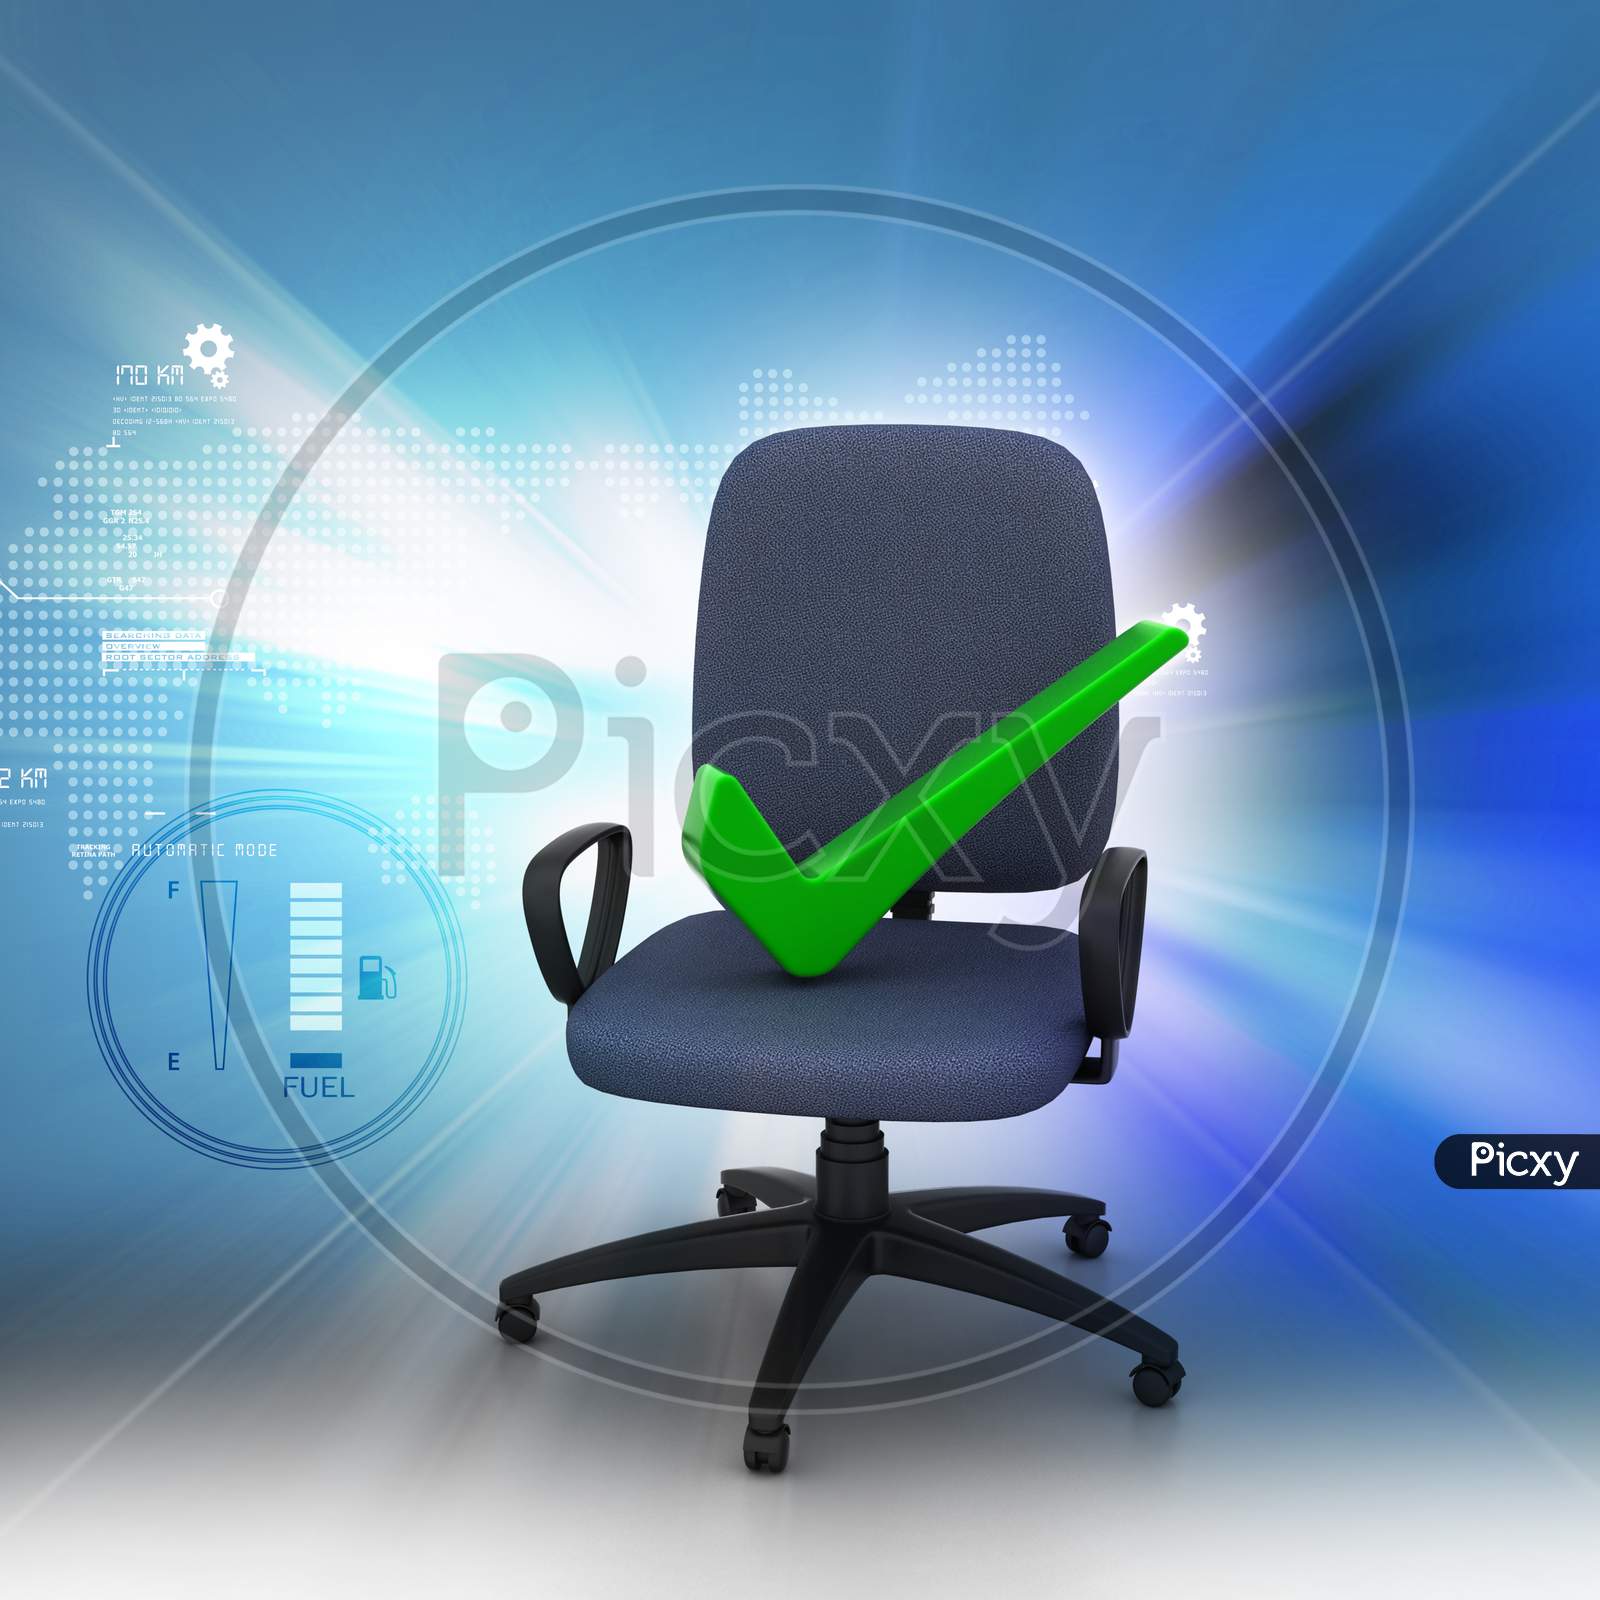 Computer Chair with Green Ticked Mark